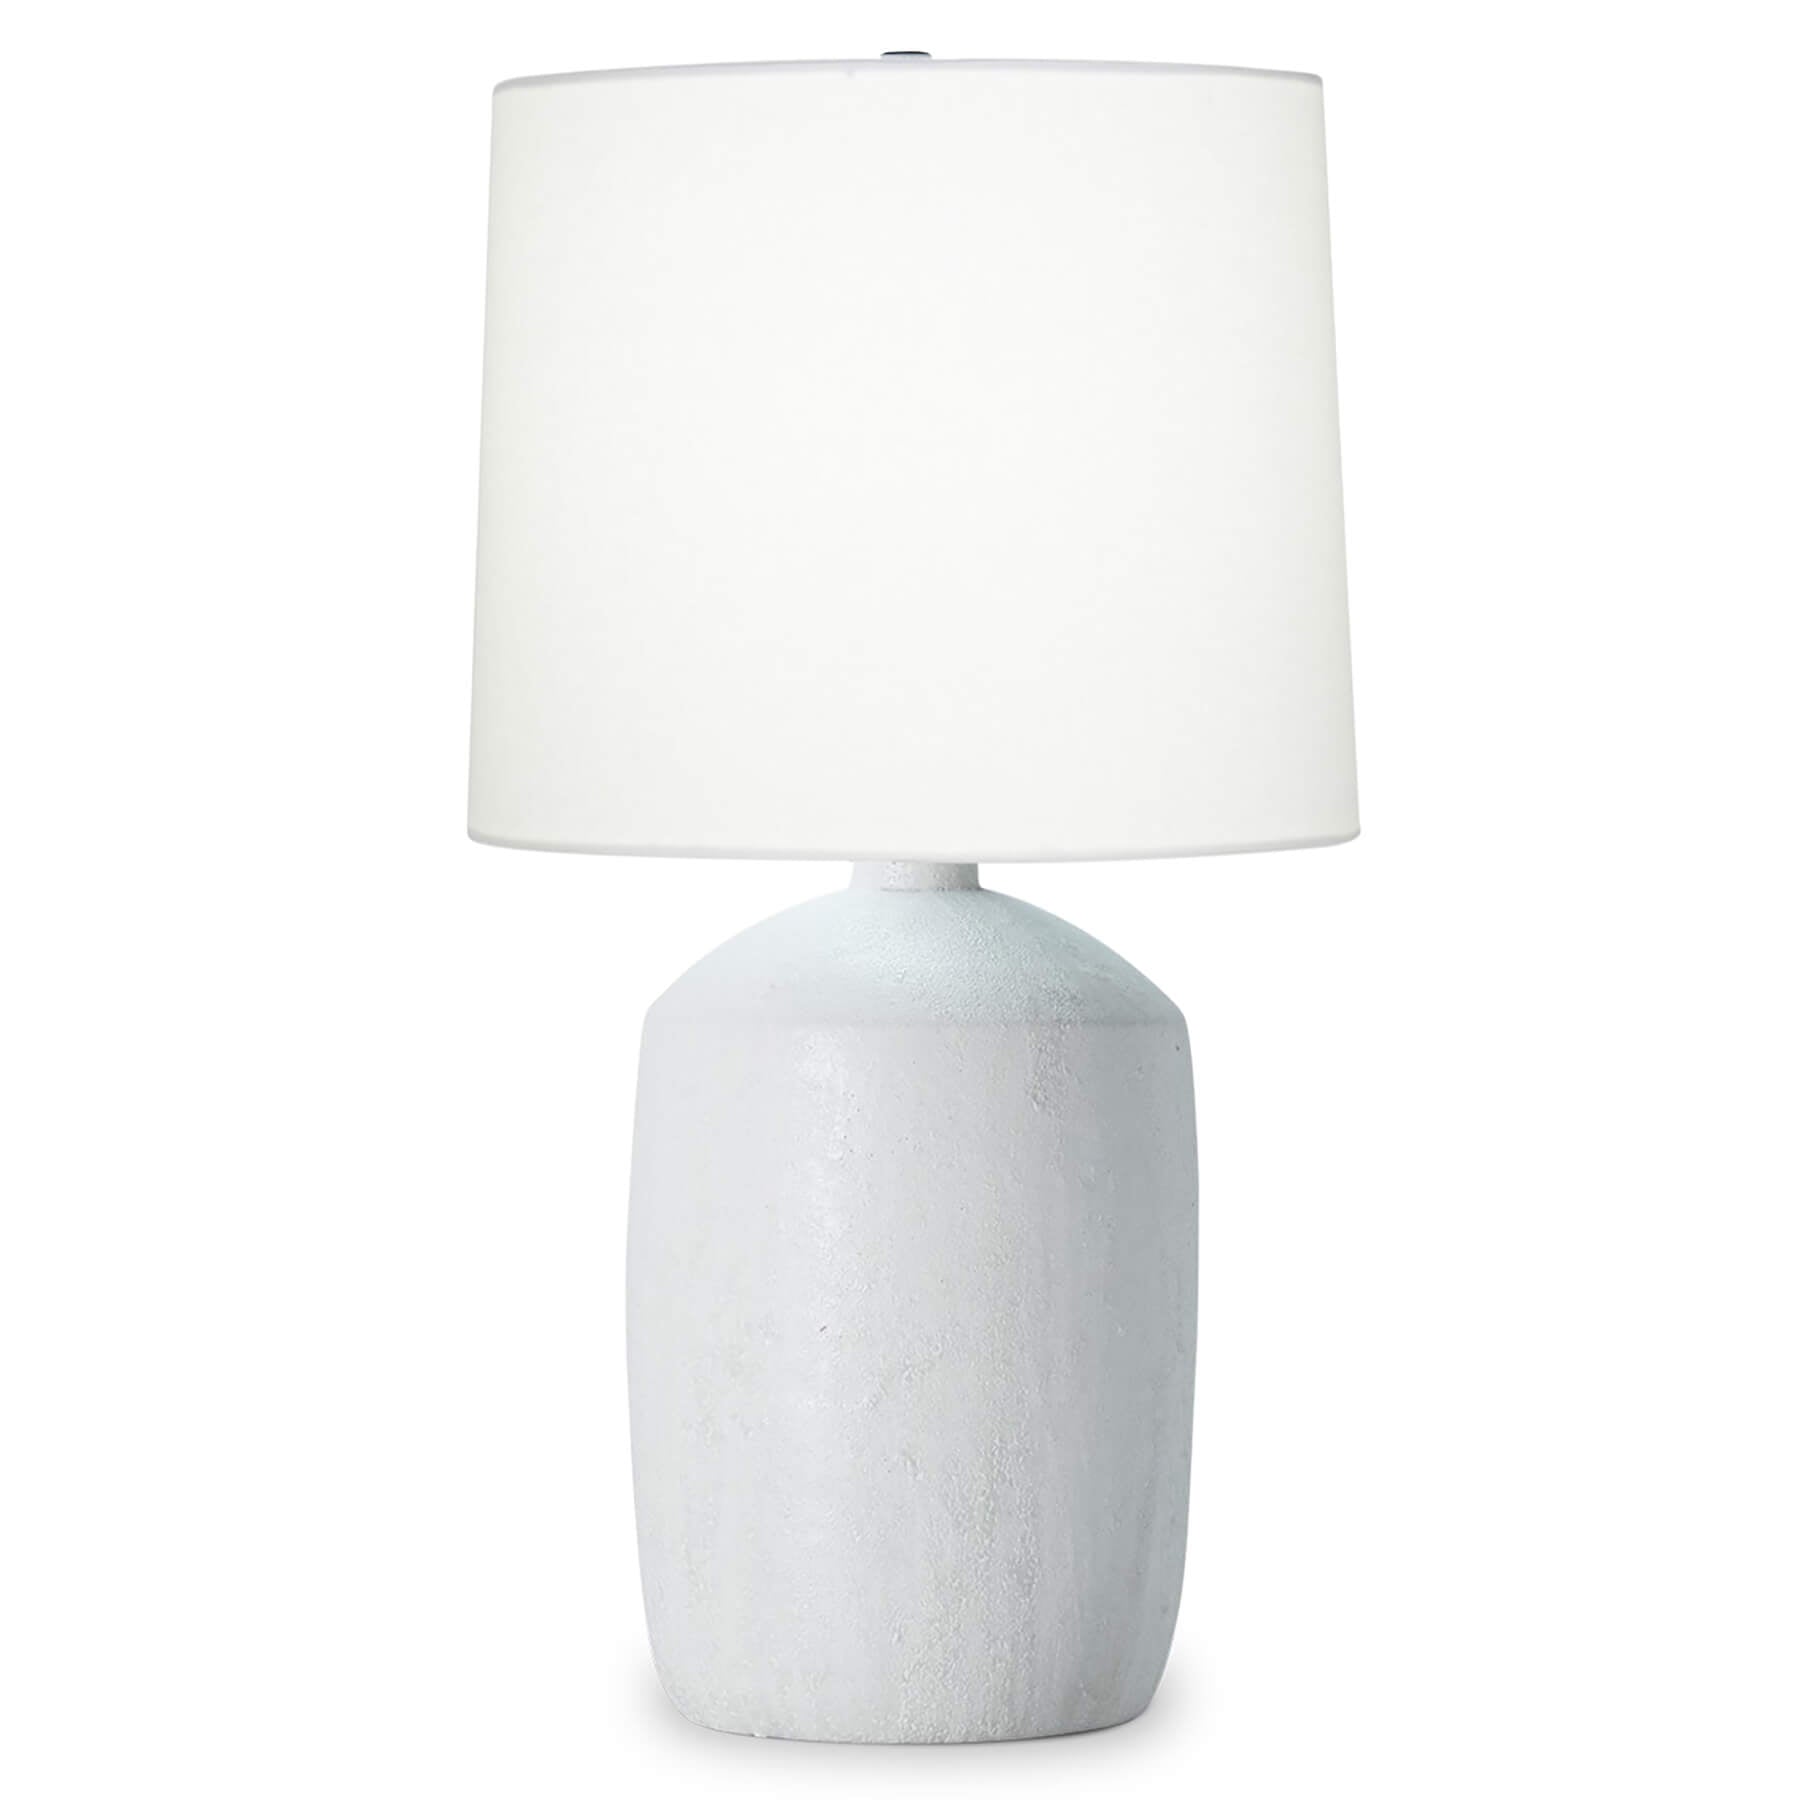 Image of Sarah Table Lamp, Off-White Linen Shade